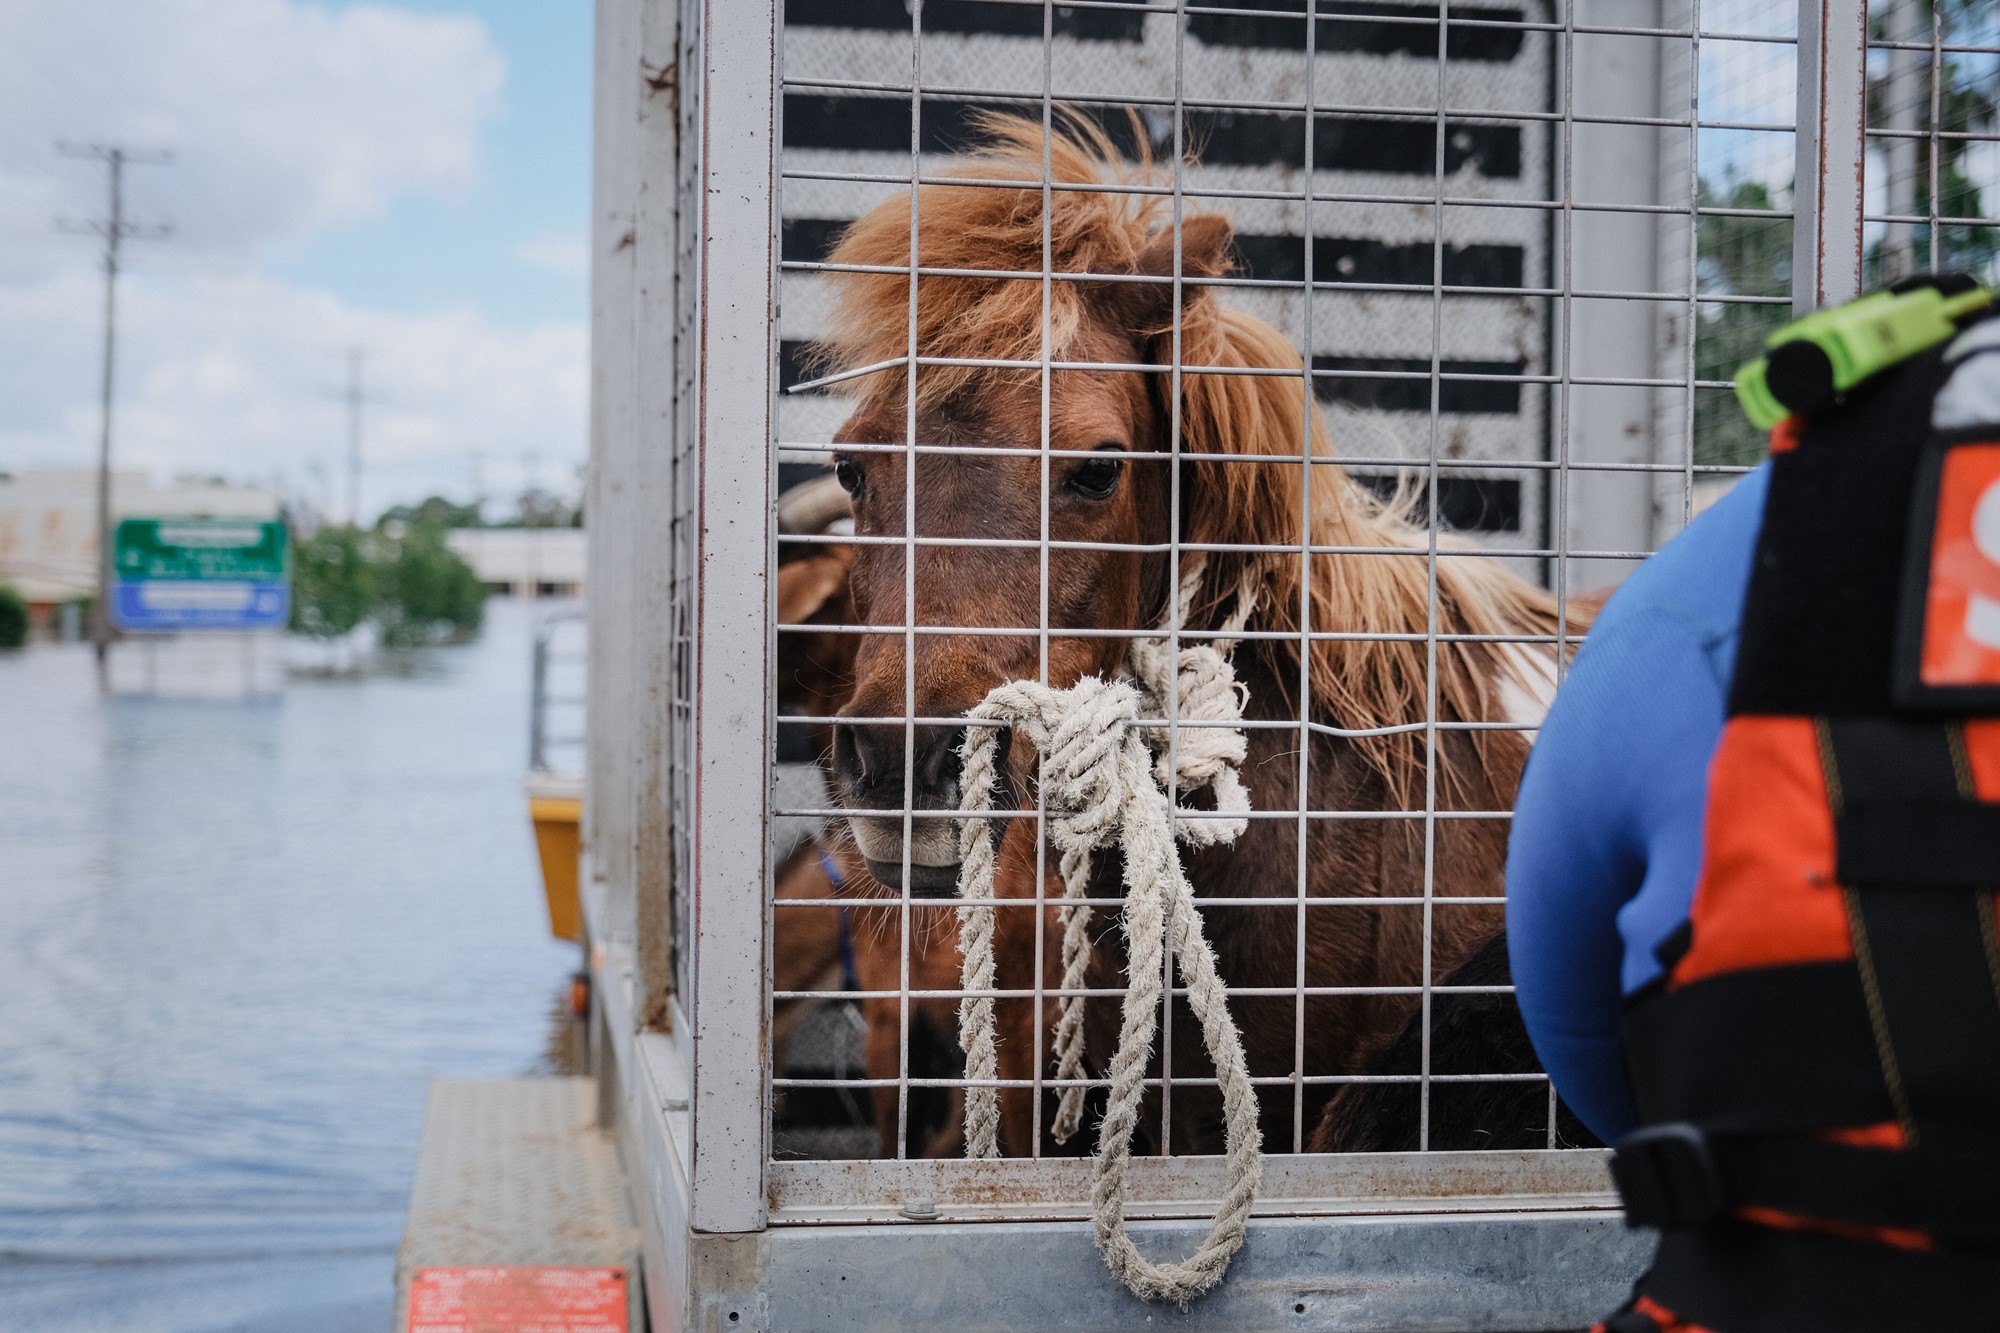 A miniature horse in a trailor with floodwaters visible in the background.